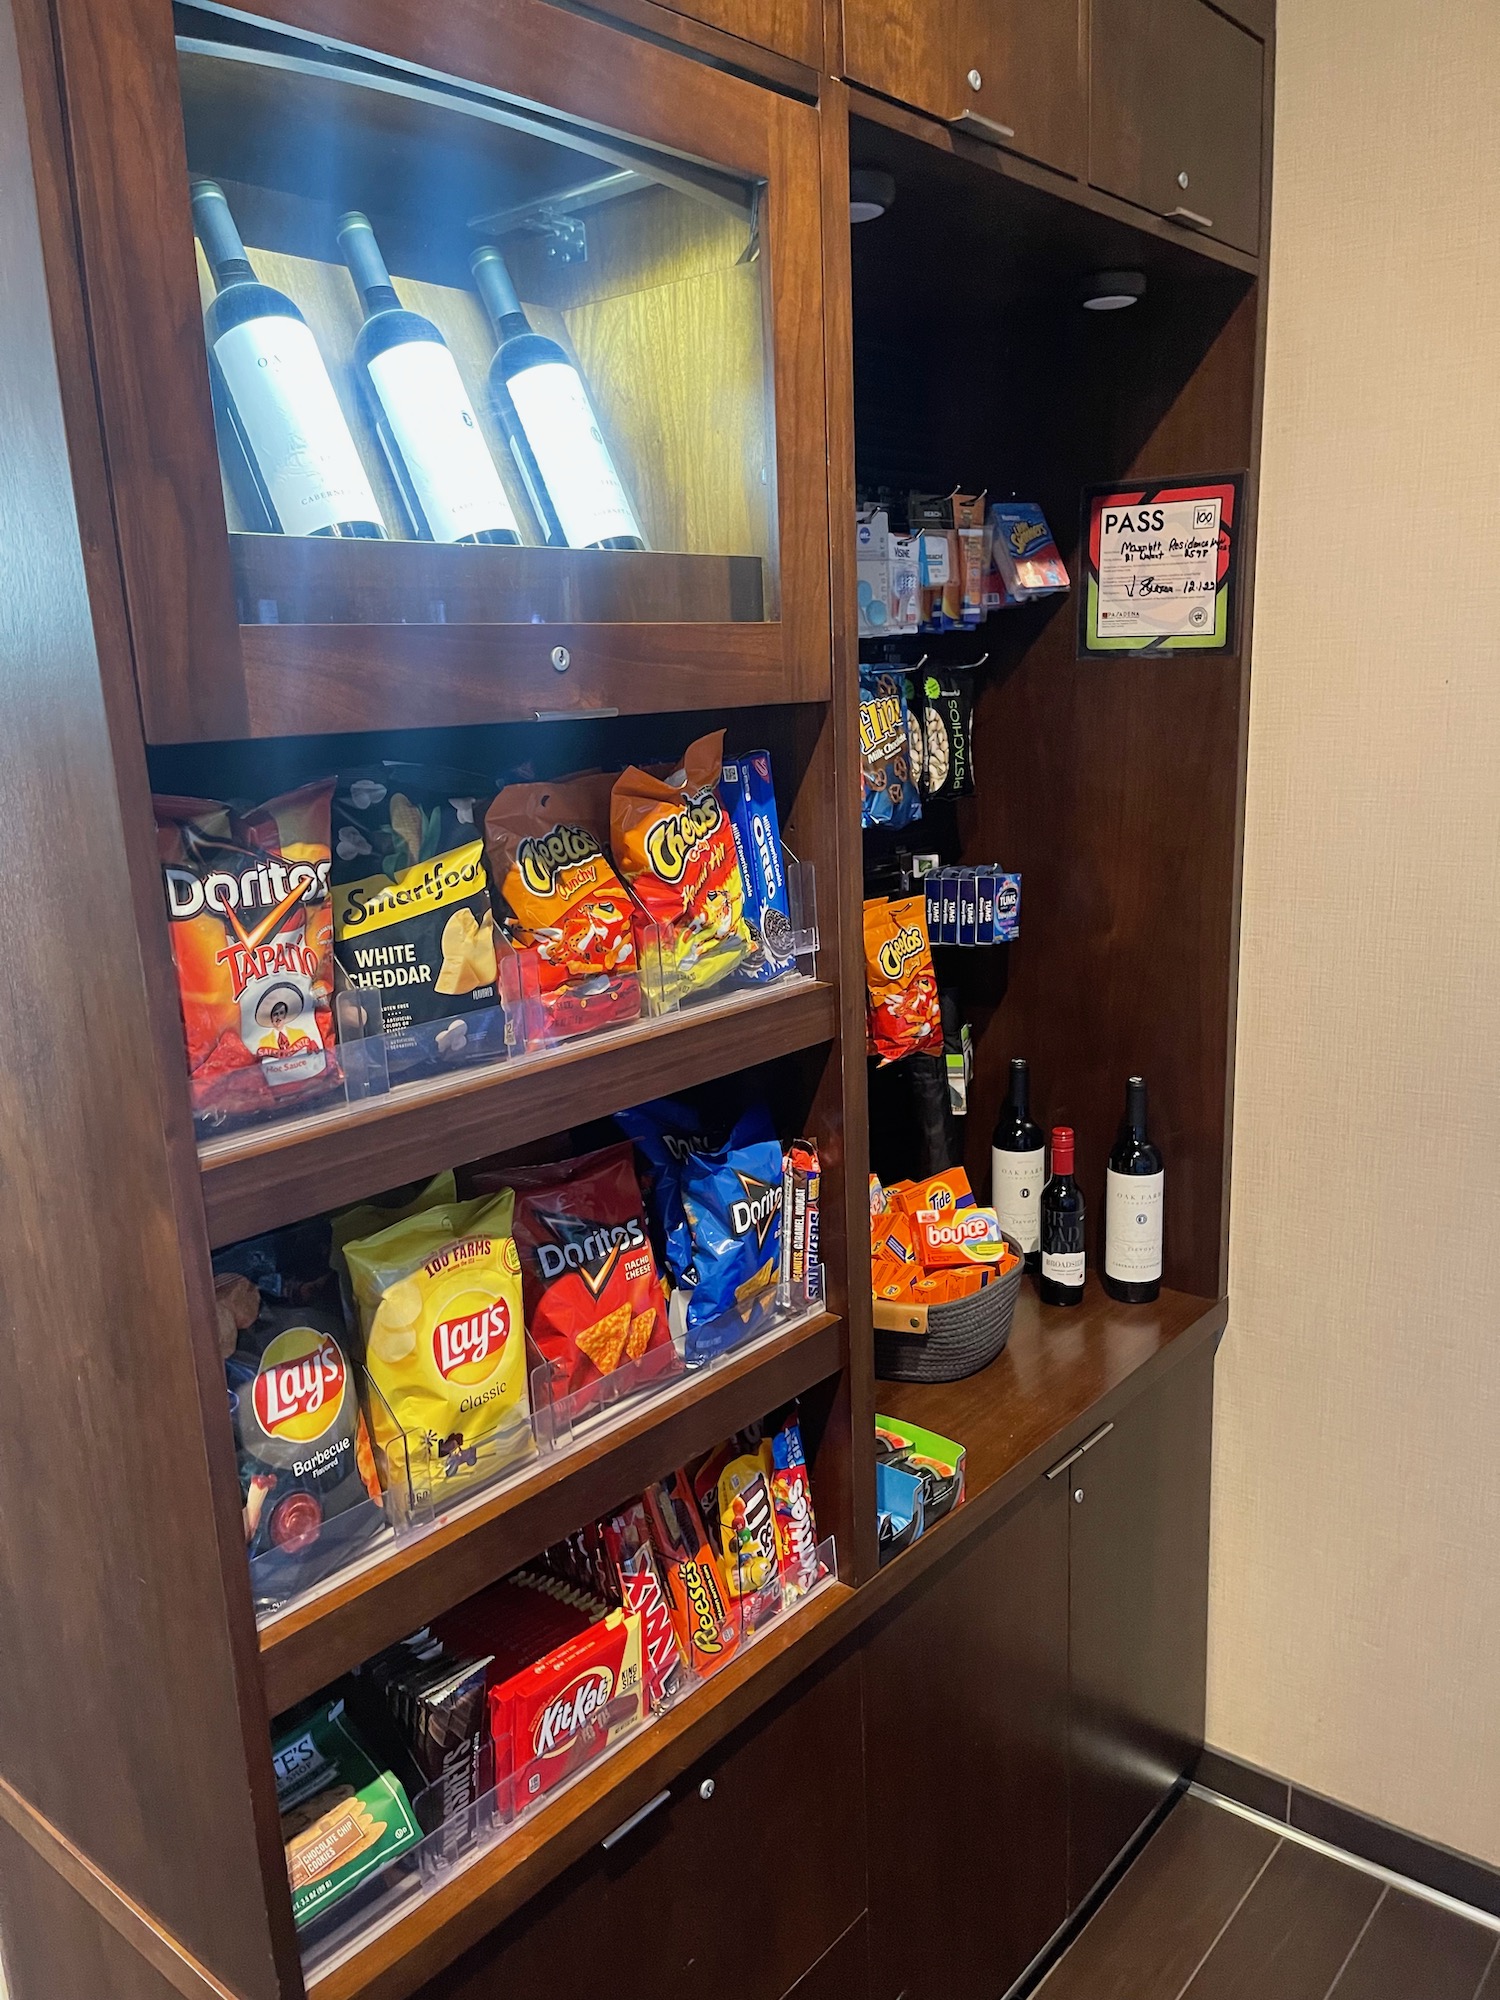 a shelf with snacks and wine bottles